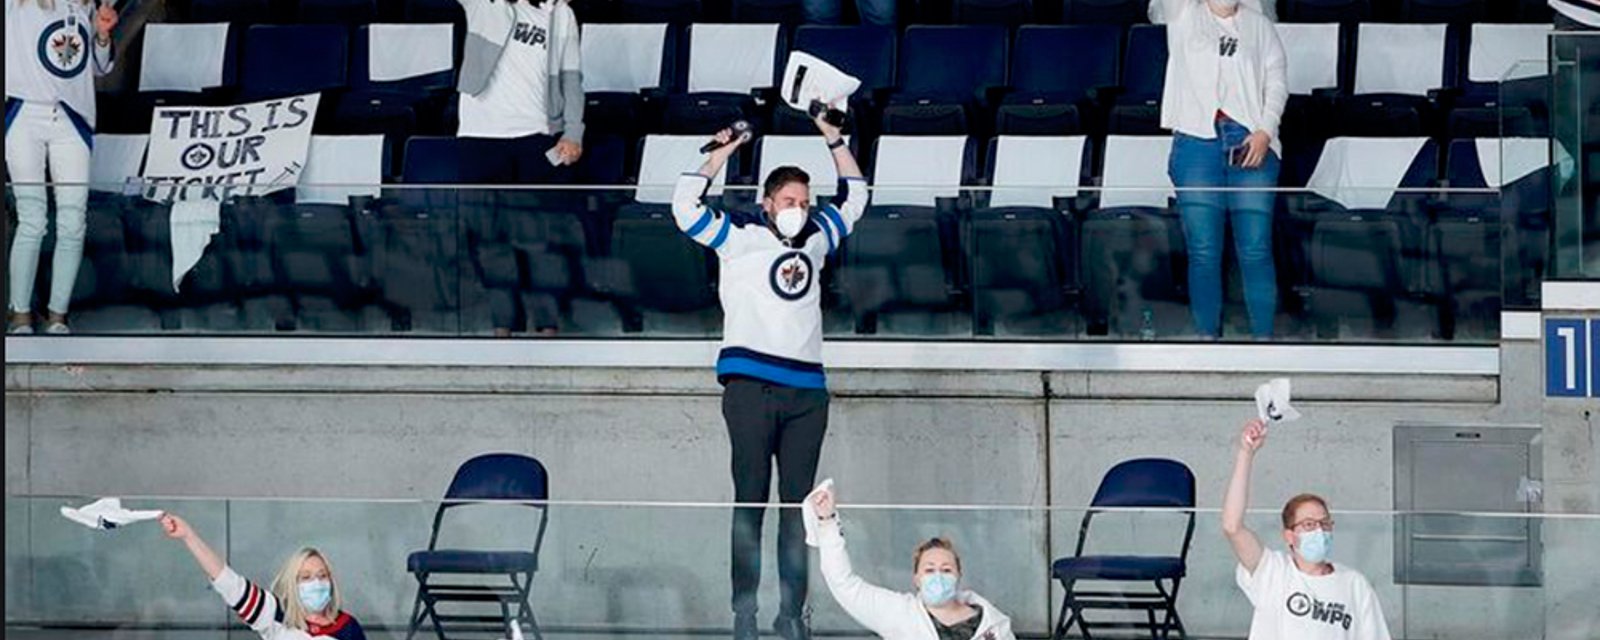 Winnipeg Jets announce fan vaccination policy for attendance at home games 